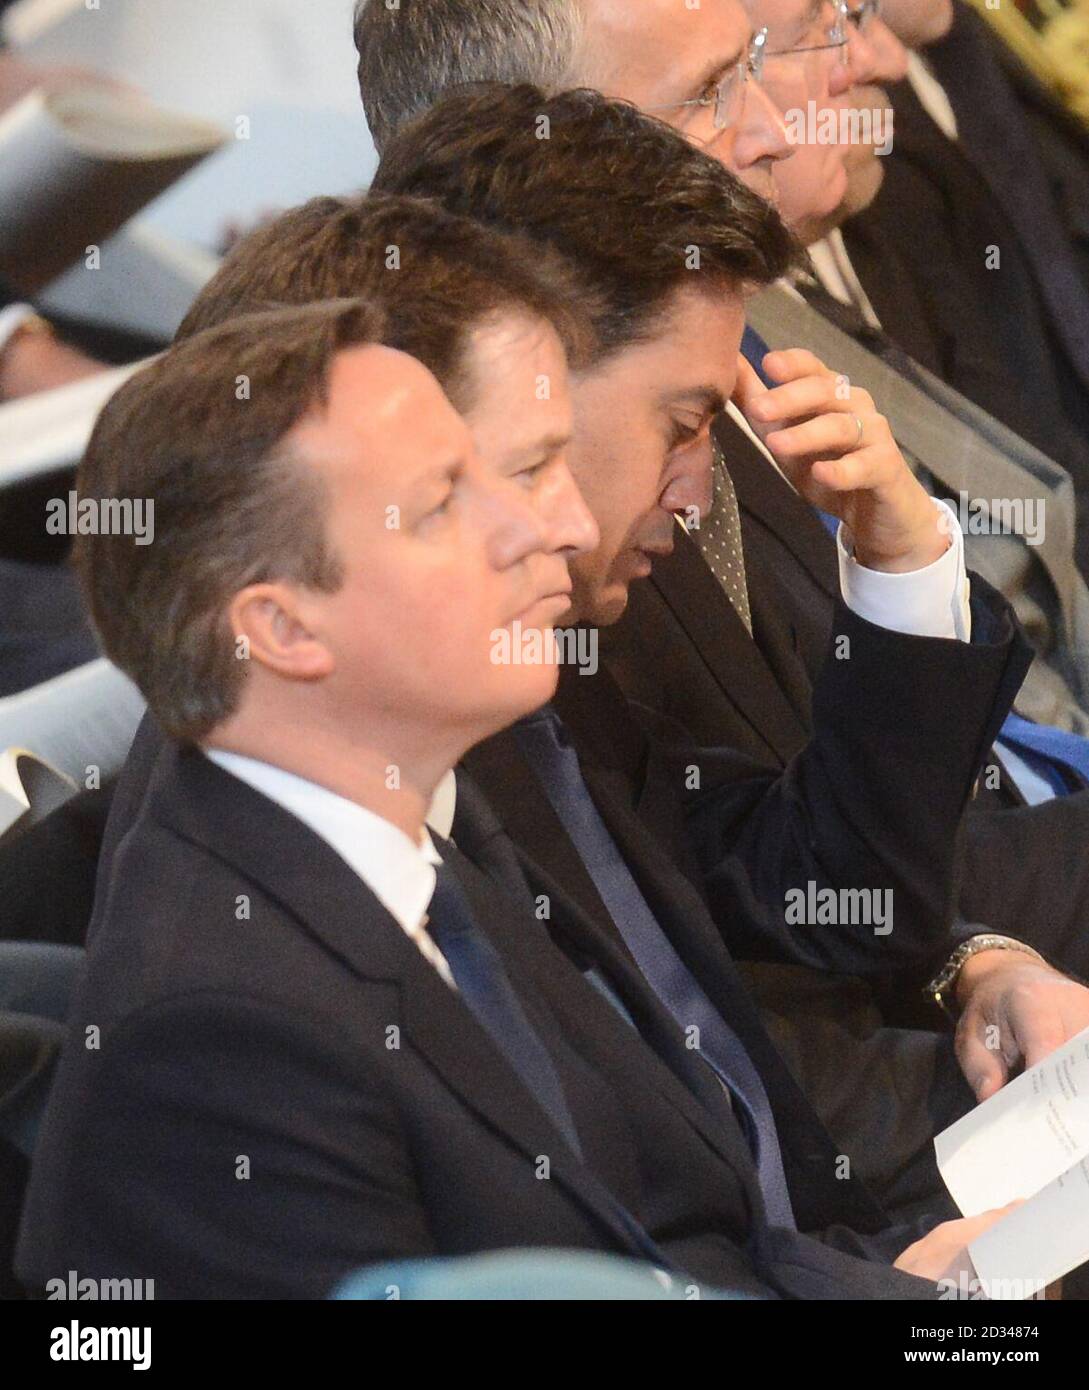 Prime Minister David Cameron, Deputy Prime Minister Nick Clegg and labour Leader Ed Miliband at a commemoration service to mark the end of combat operations in Afghanistan at St Paul's Cathedral, London. Stock Photo